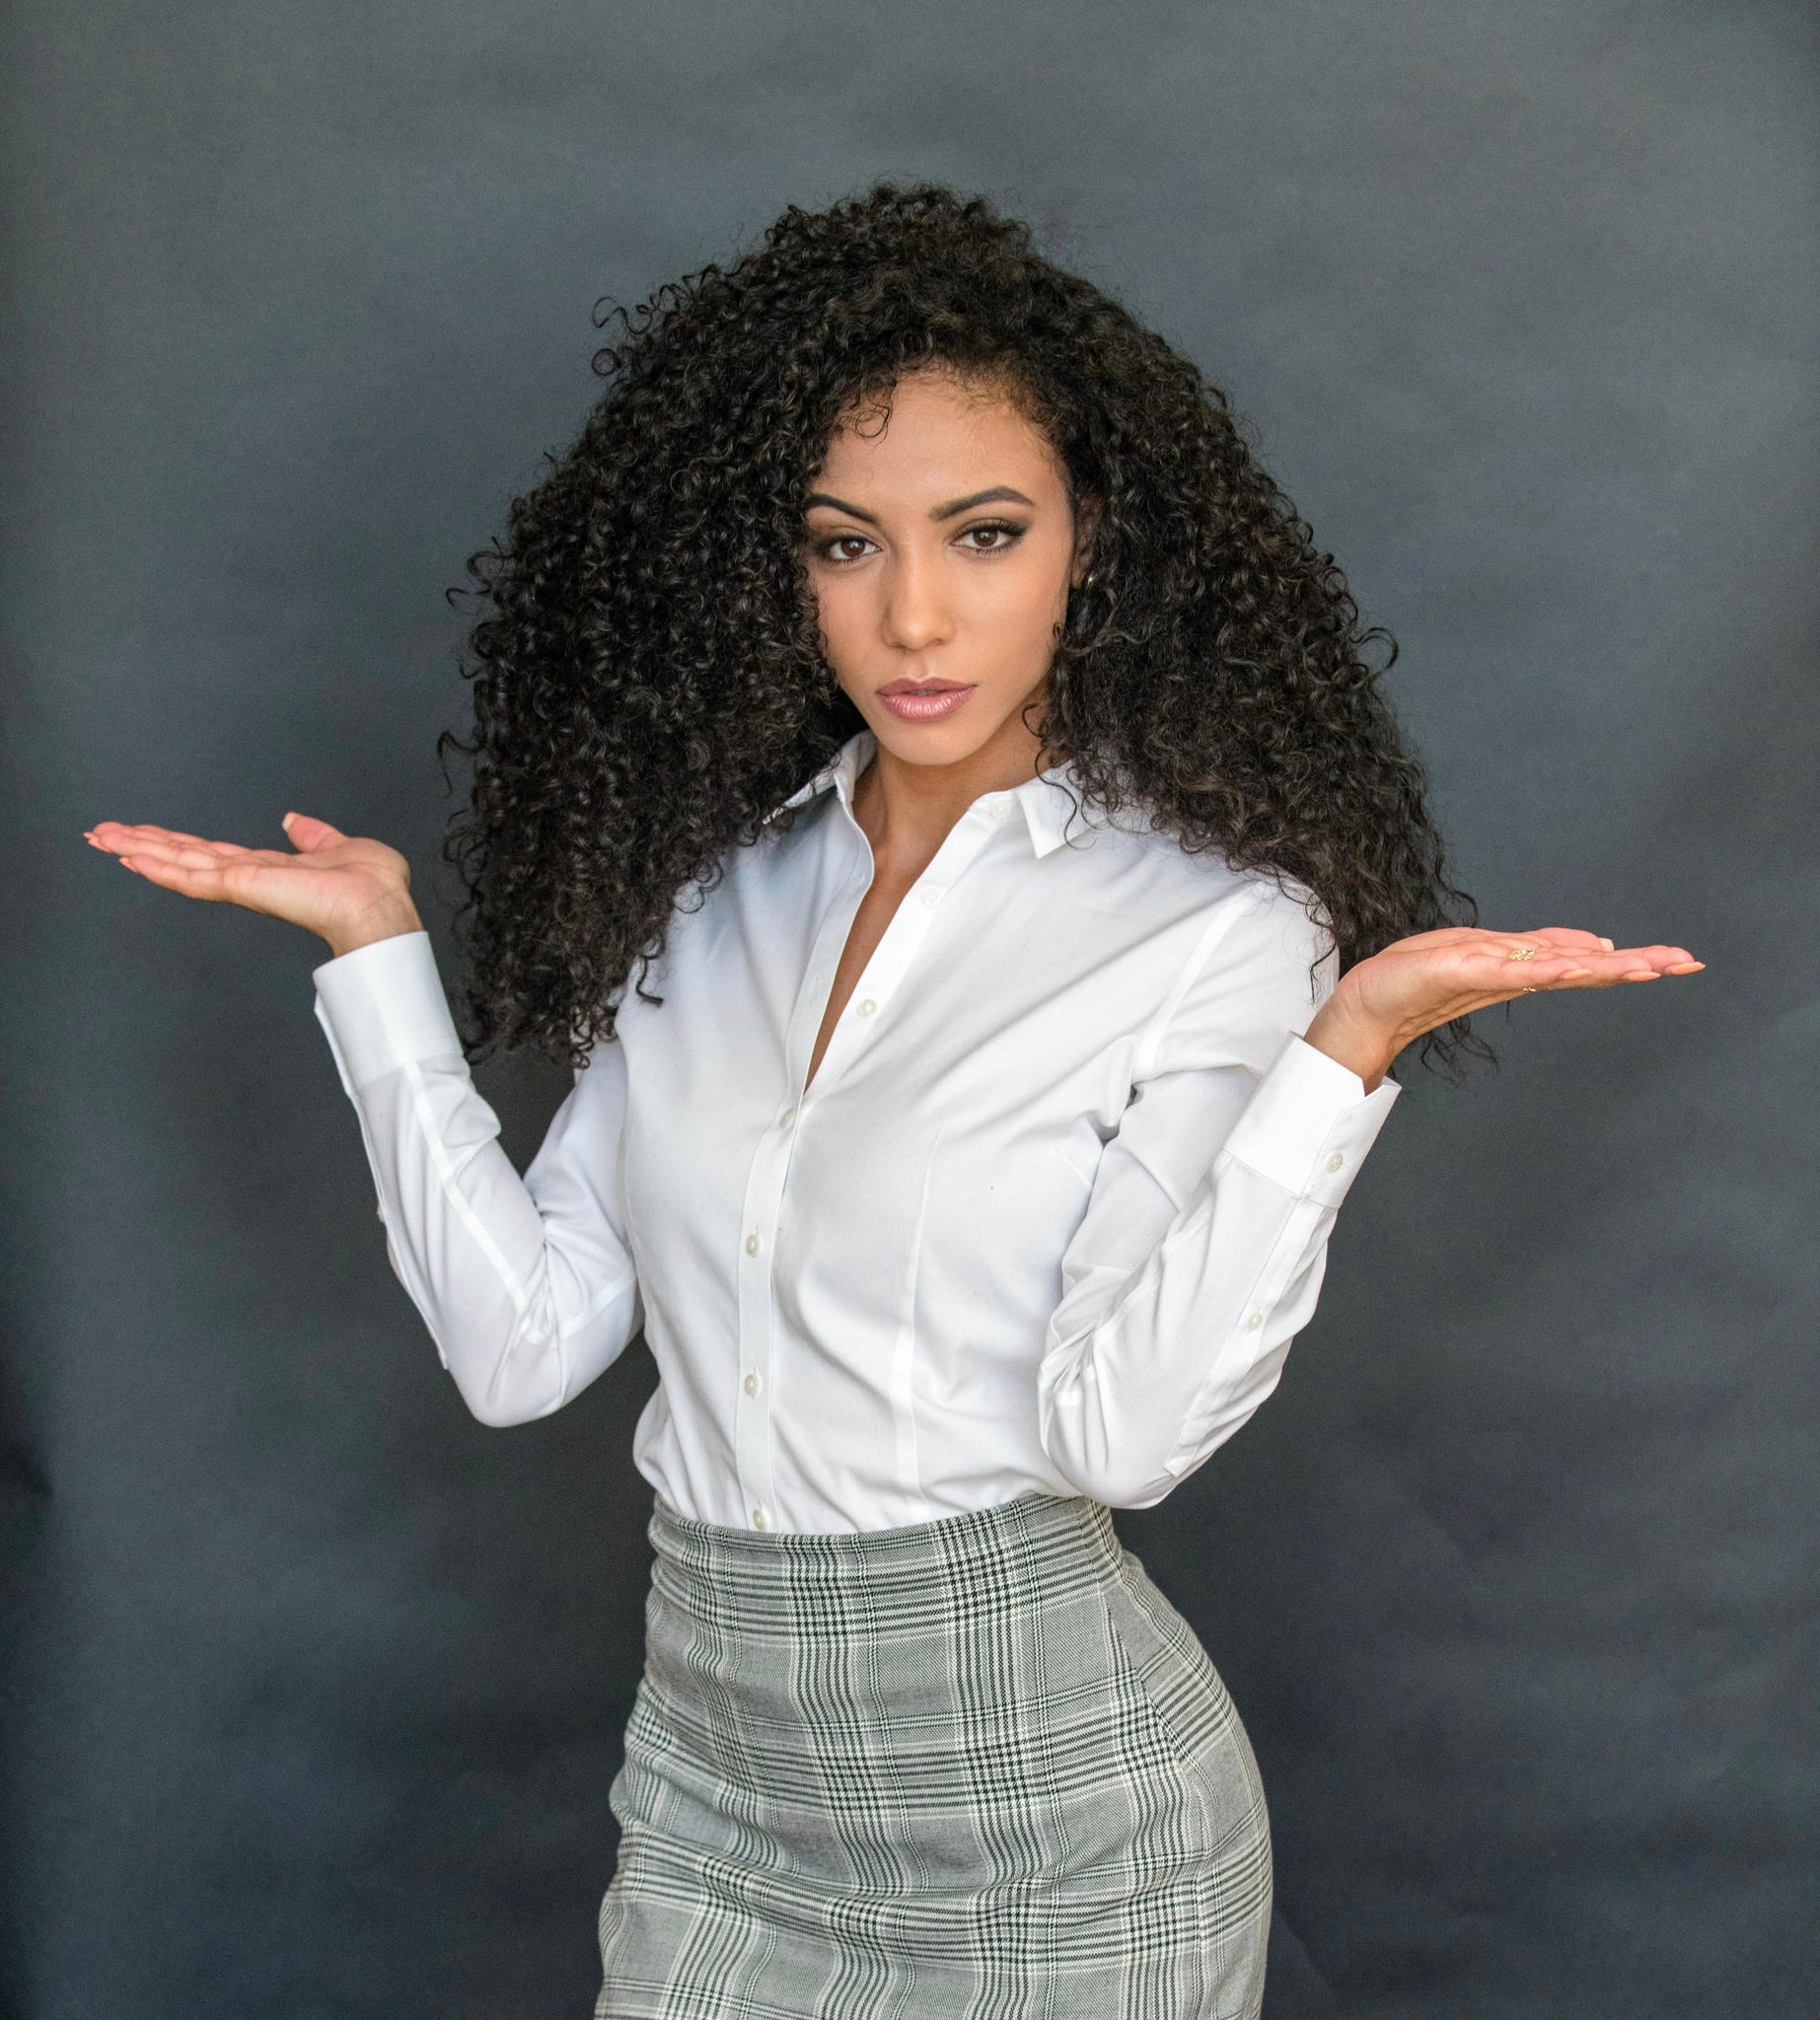 37 Miss USA winners share what we can do to #BalanceForBetter & form a ...